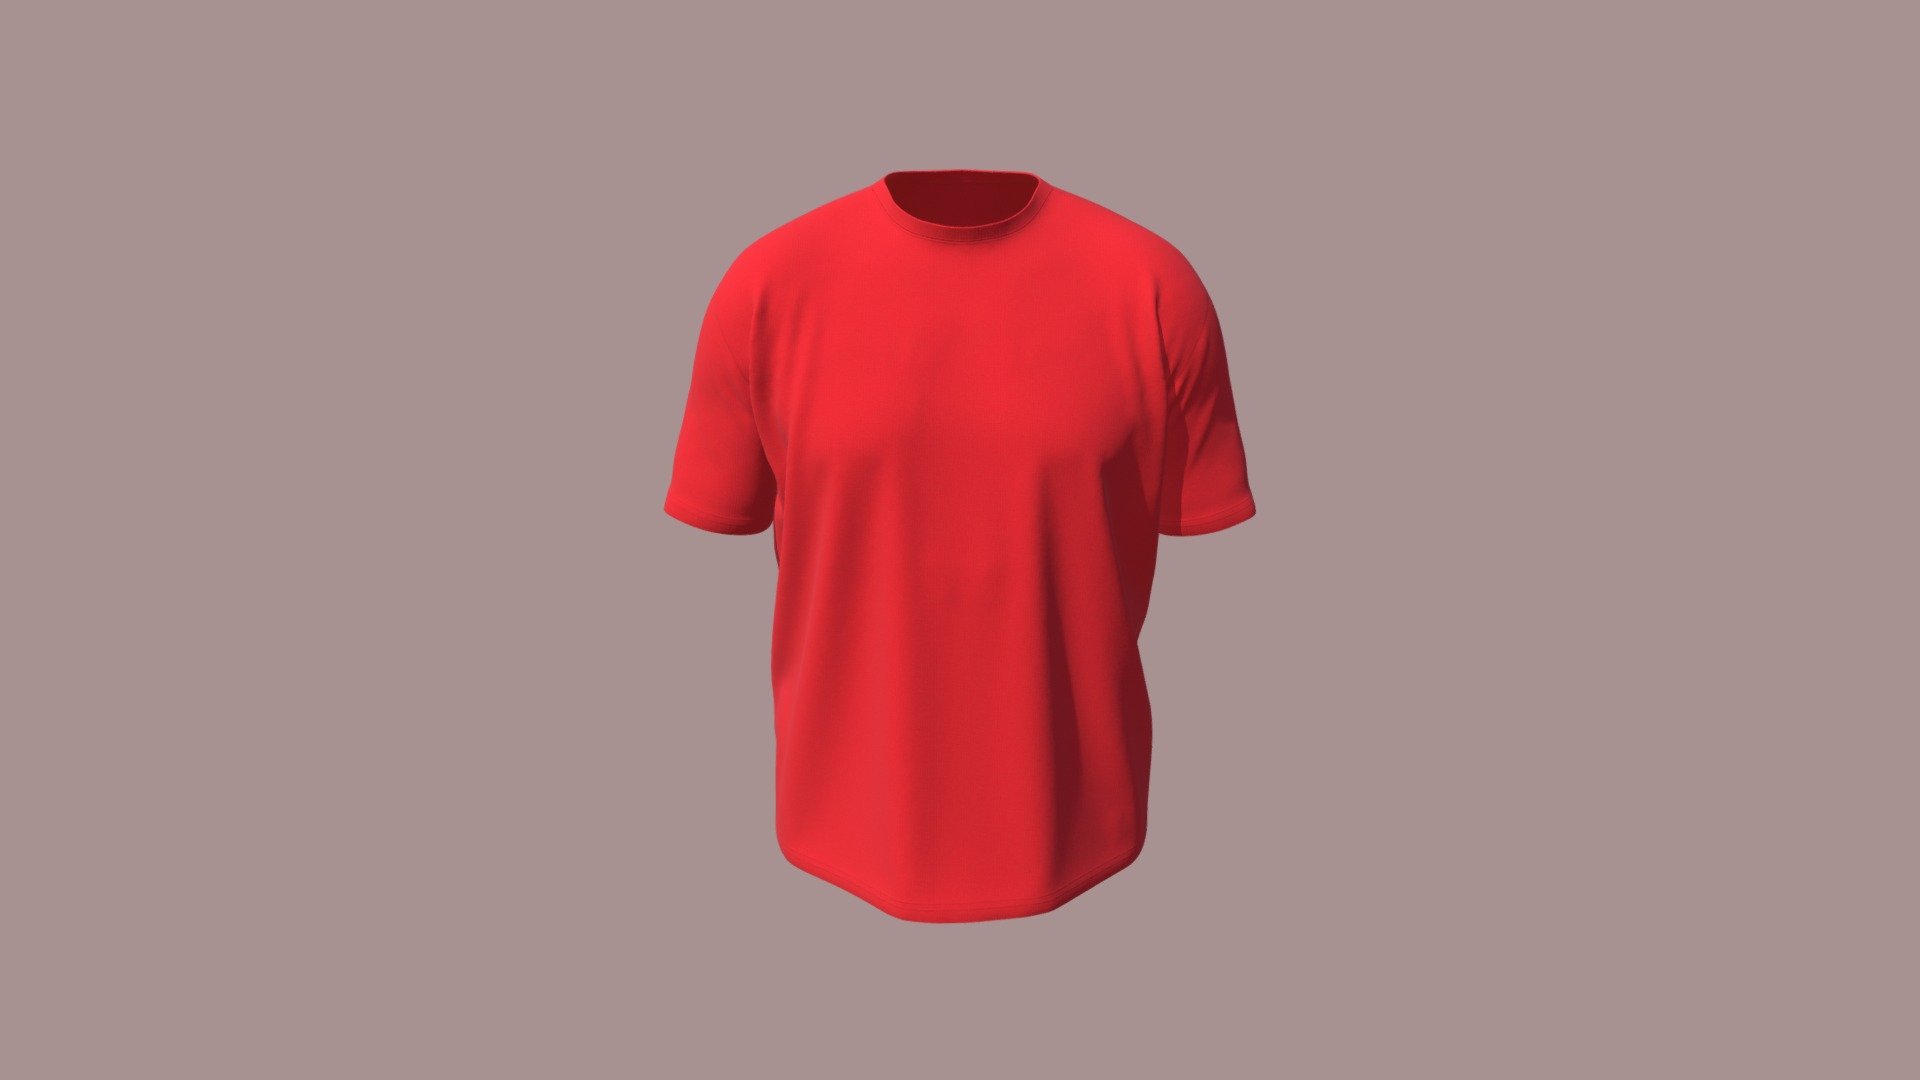 Cloth Title = Oversized Comfort Soft Worn Tee 

SKU = DG100049 

Category = Men 

Product Type = Tee 

Cloth Length = Regular 

Body Fit = Oversized  

Occasion = Casual  

Sleeve Style = Set In Sleeve


Our Services:

3D Apparel Design.

OBJ,FBX,GLTF Making with High/Low Poly.

Fabric Digitalization.

Mockup making.

3D Teck Pack.

Pattern Making.

2D Illustration.

Cloth Animation and 360 Spin Video.


We designed all the types of cloth specially focused on product visualization, e-commerce, fitting, and production. 

We will design: 

T-shirts 

Polo shirts 

Hoodies 

Sweatshirt 

Jackets 

Shirts 

TankTops 

Trousers 

Bras 

Underwear 

Blazer 

Aprons 

Leggings 

and All Fashion items. 




Our goal is to make sure what we provide you, meets your demand 3d model